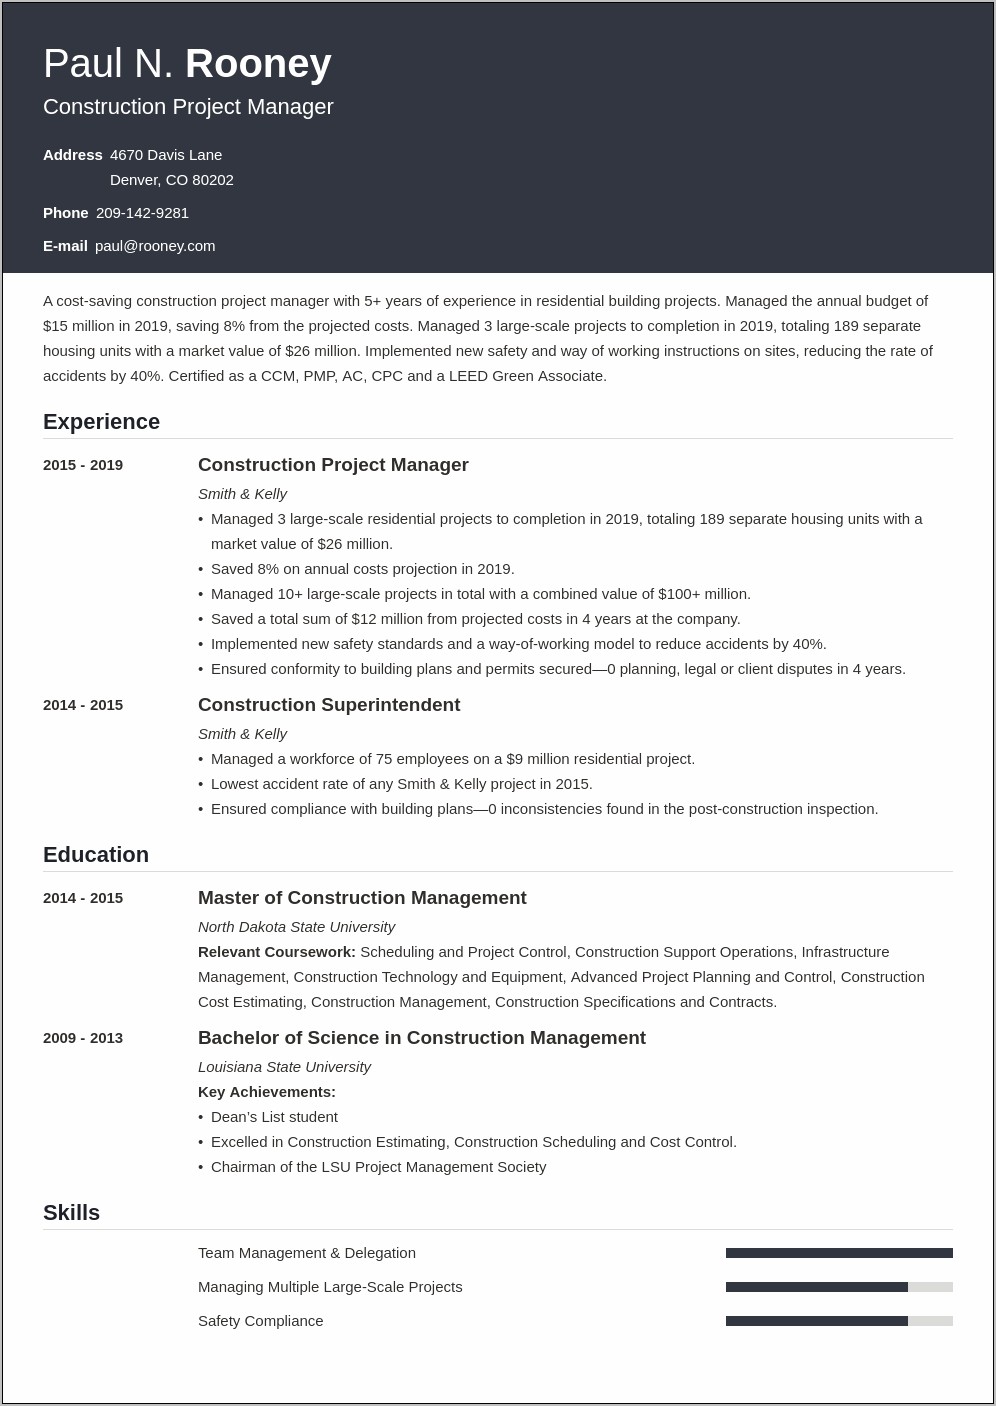 Project Manager In Construction Resume